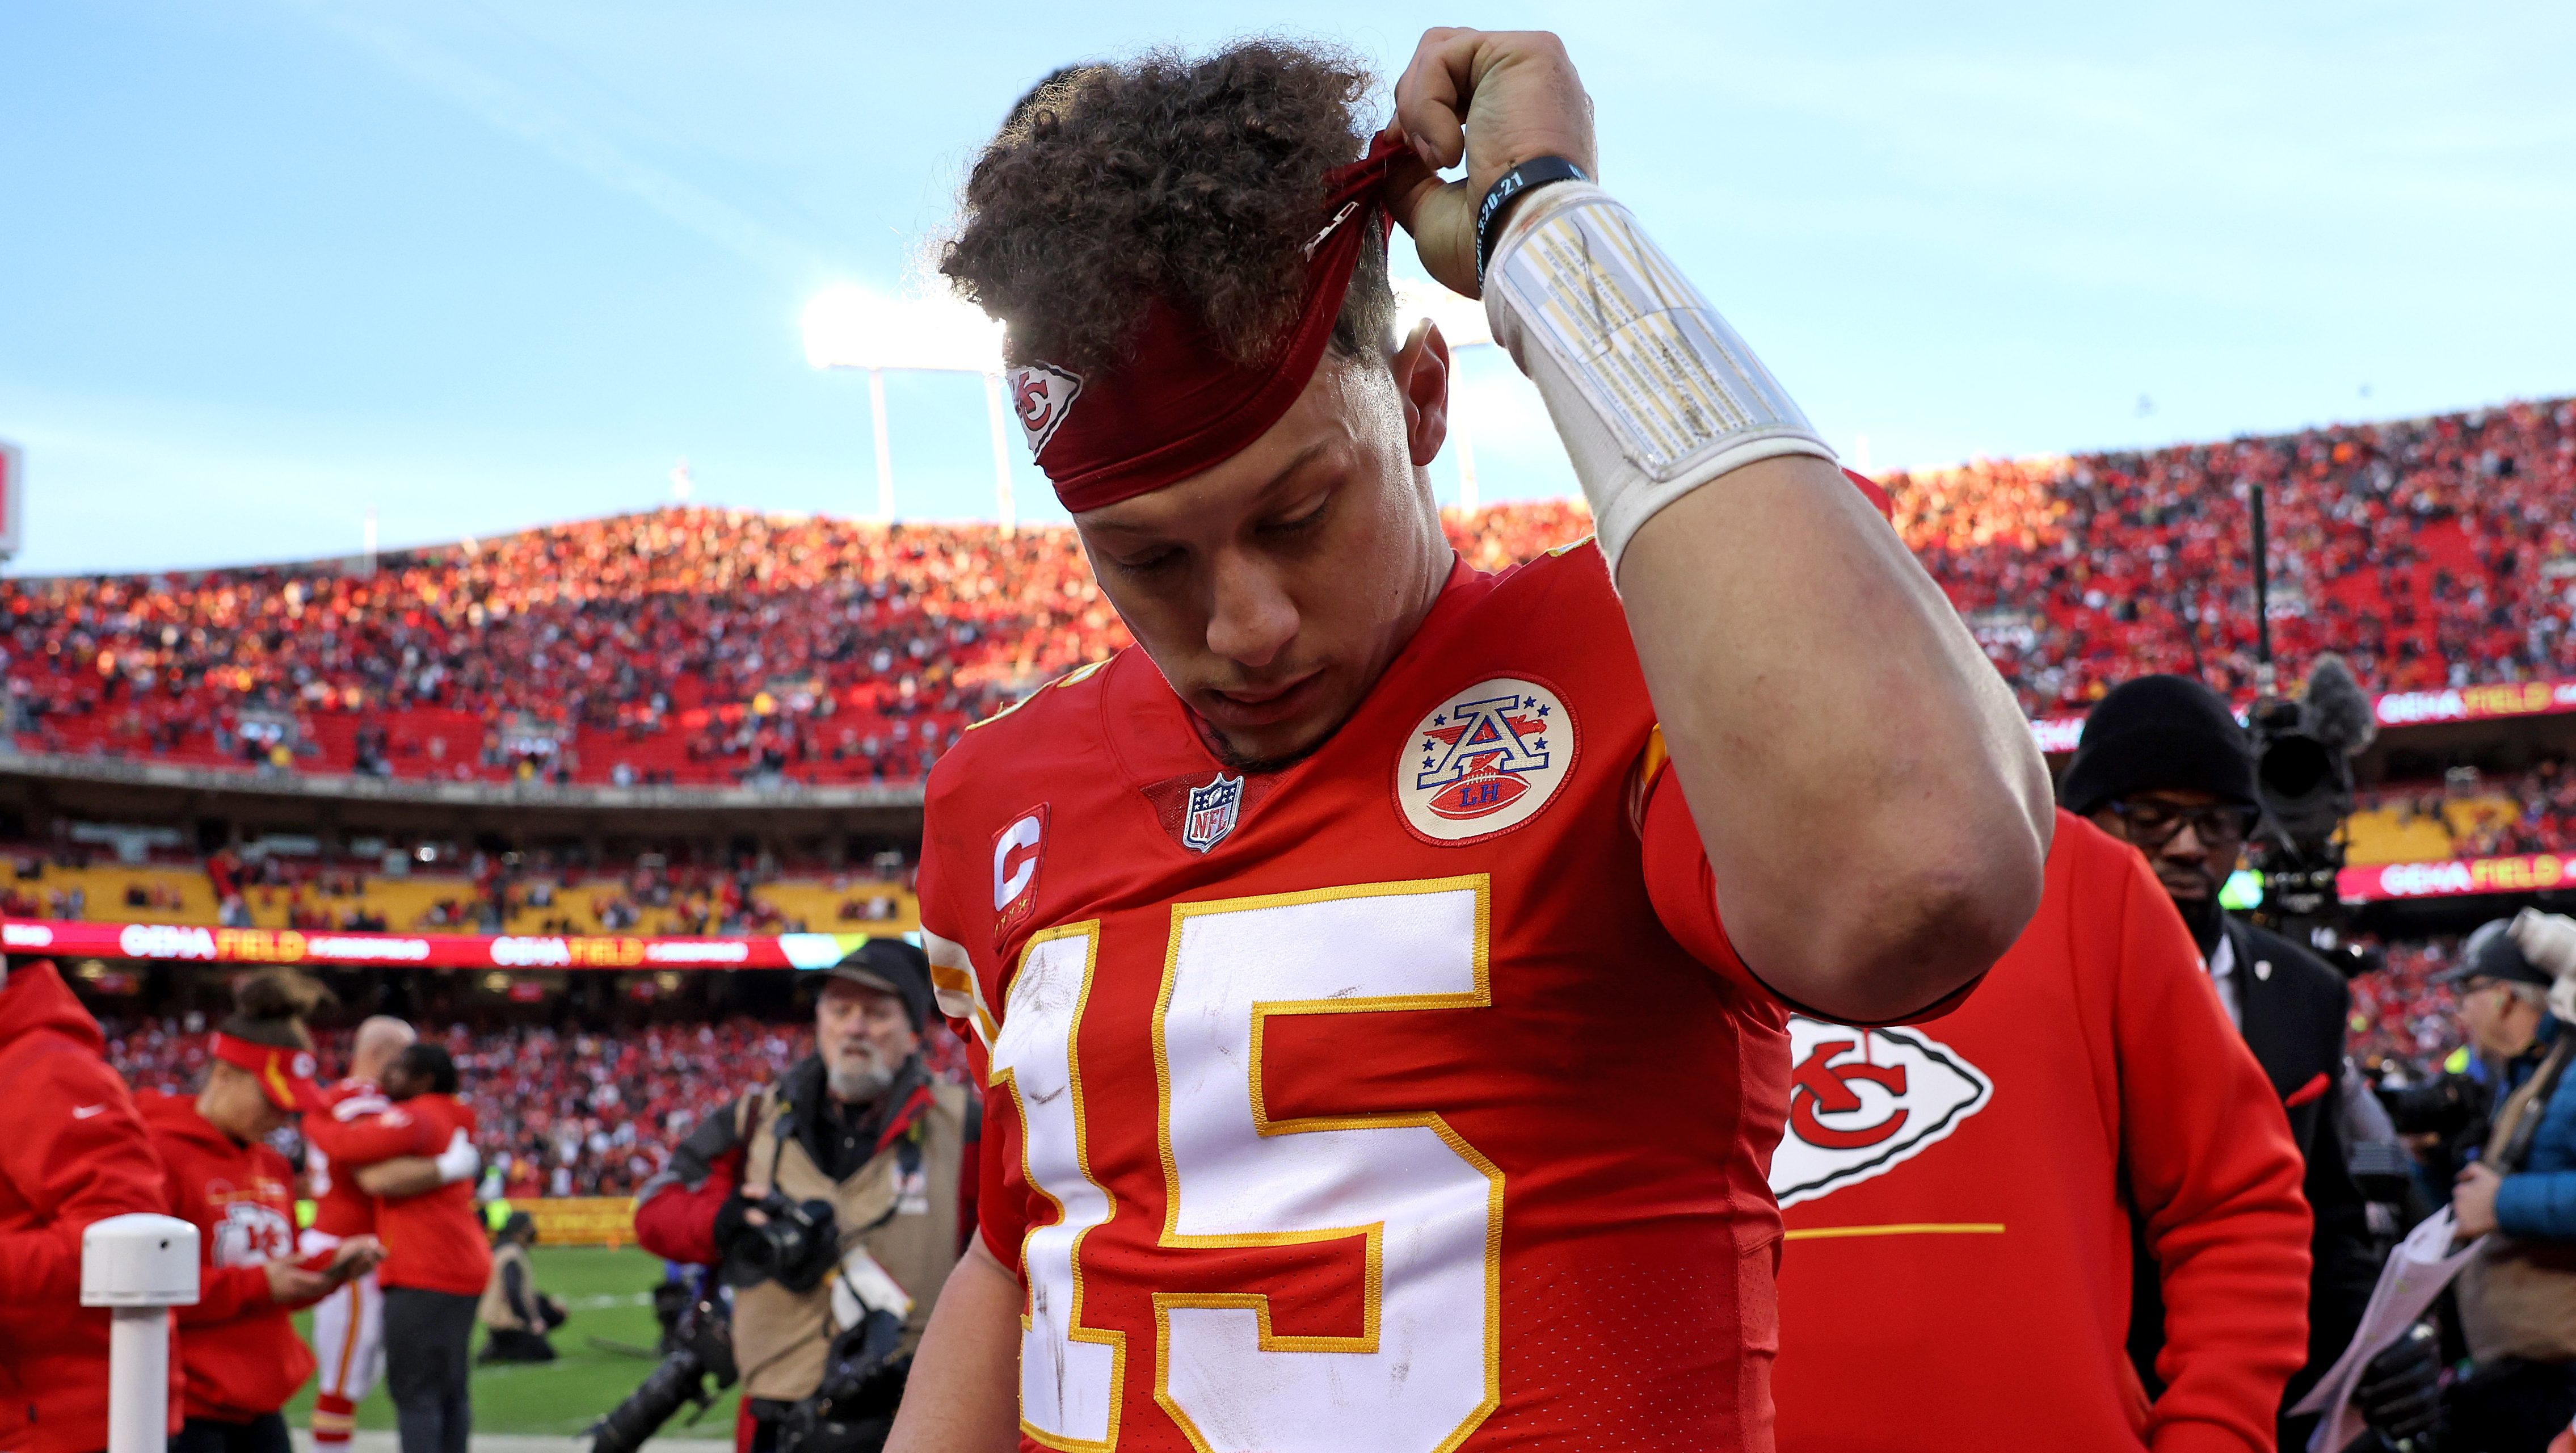 Even in Victory, It's Time for Kansas City to Drop the “Chiefs” Name